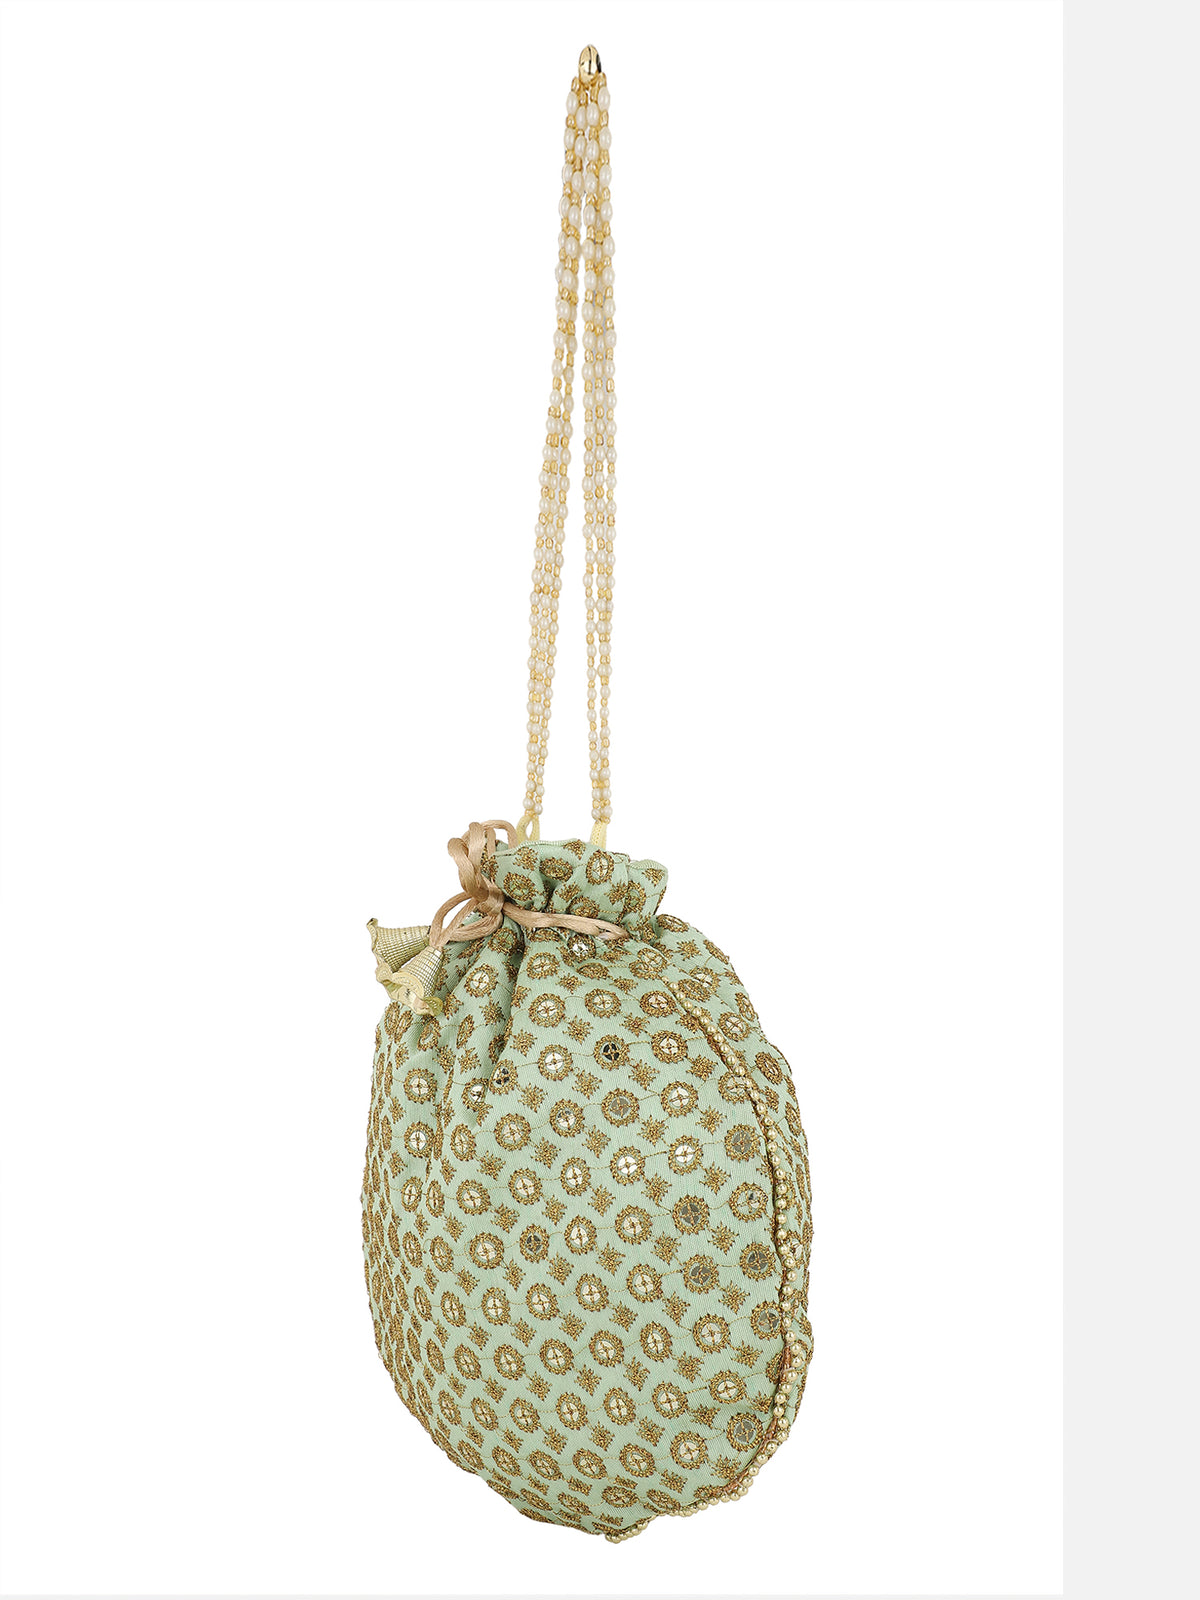 Handcrafted Mint Green embroidery Potli Bag